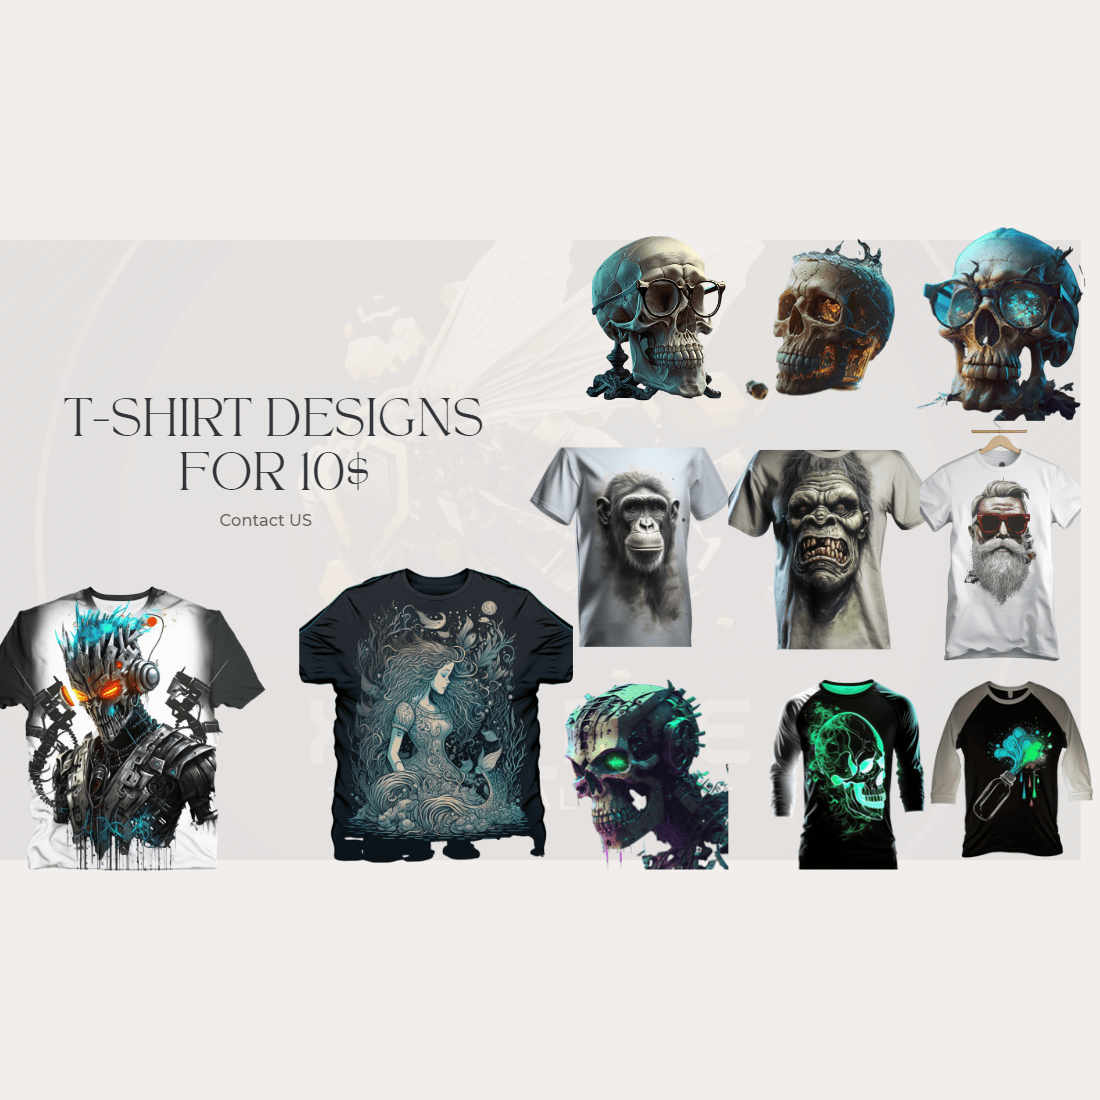 T shirt designs for 10 $ cover image.